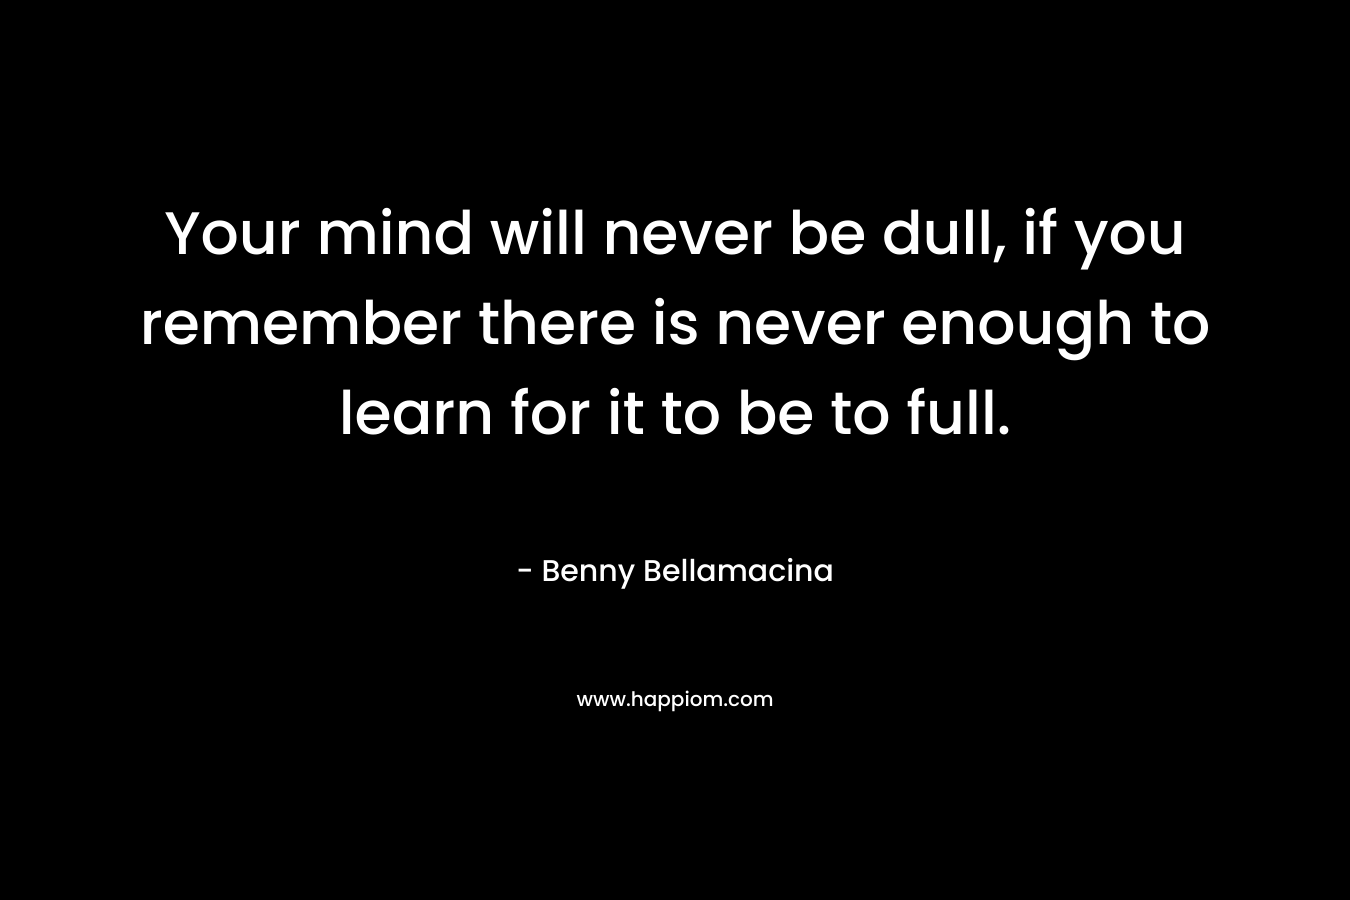 Your mind will never be dull, if you remember there is never enough to learn for it to be to full.